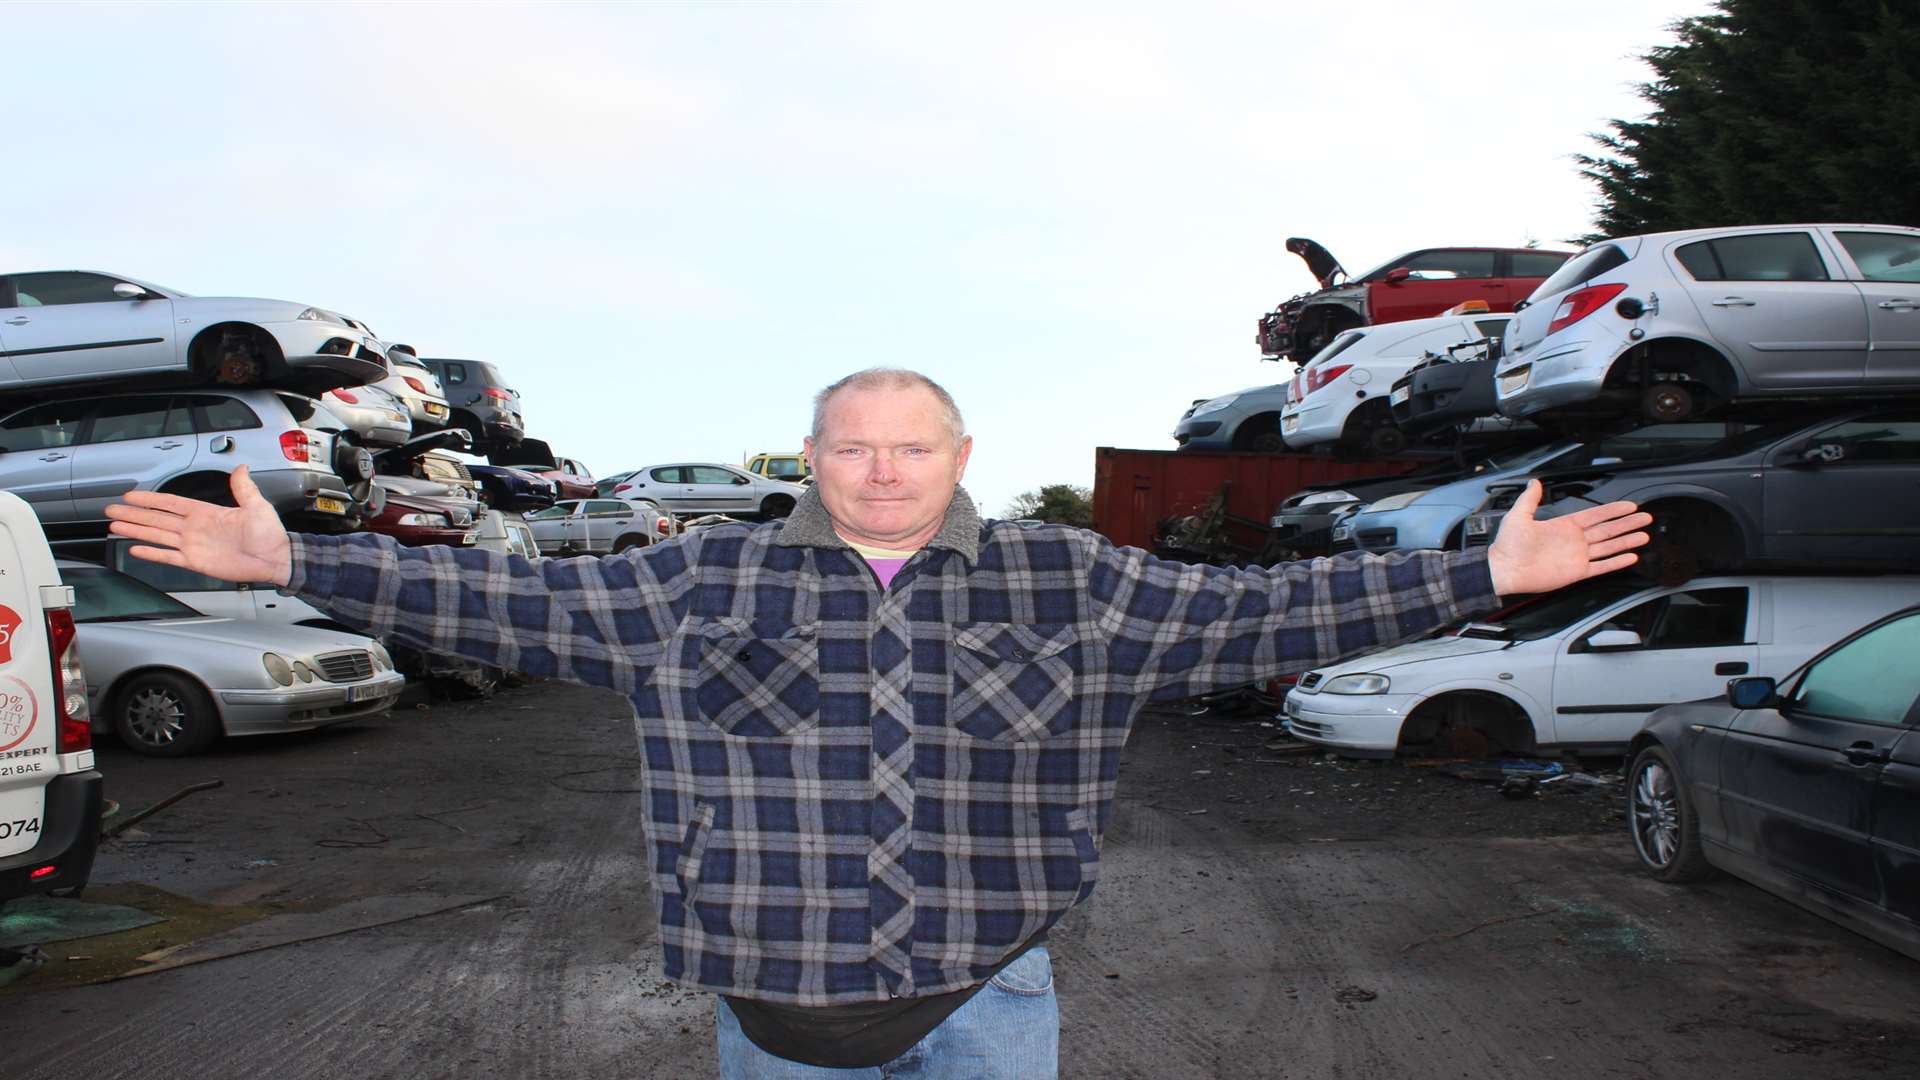 All change: David Leaton has big plans for his car breakers